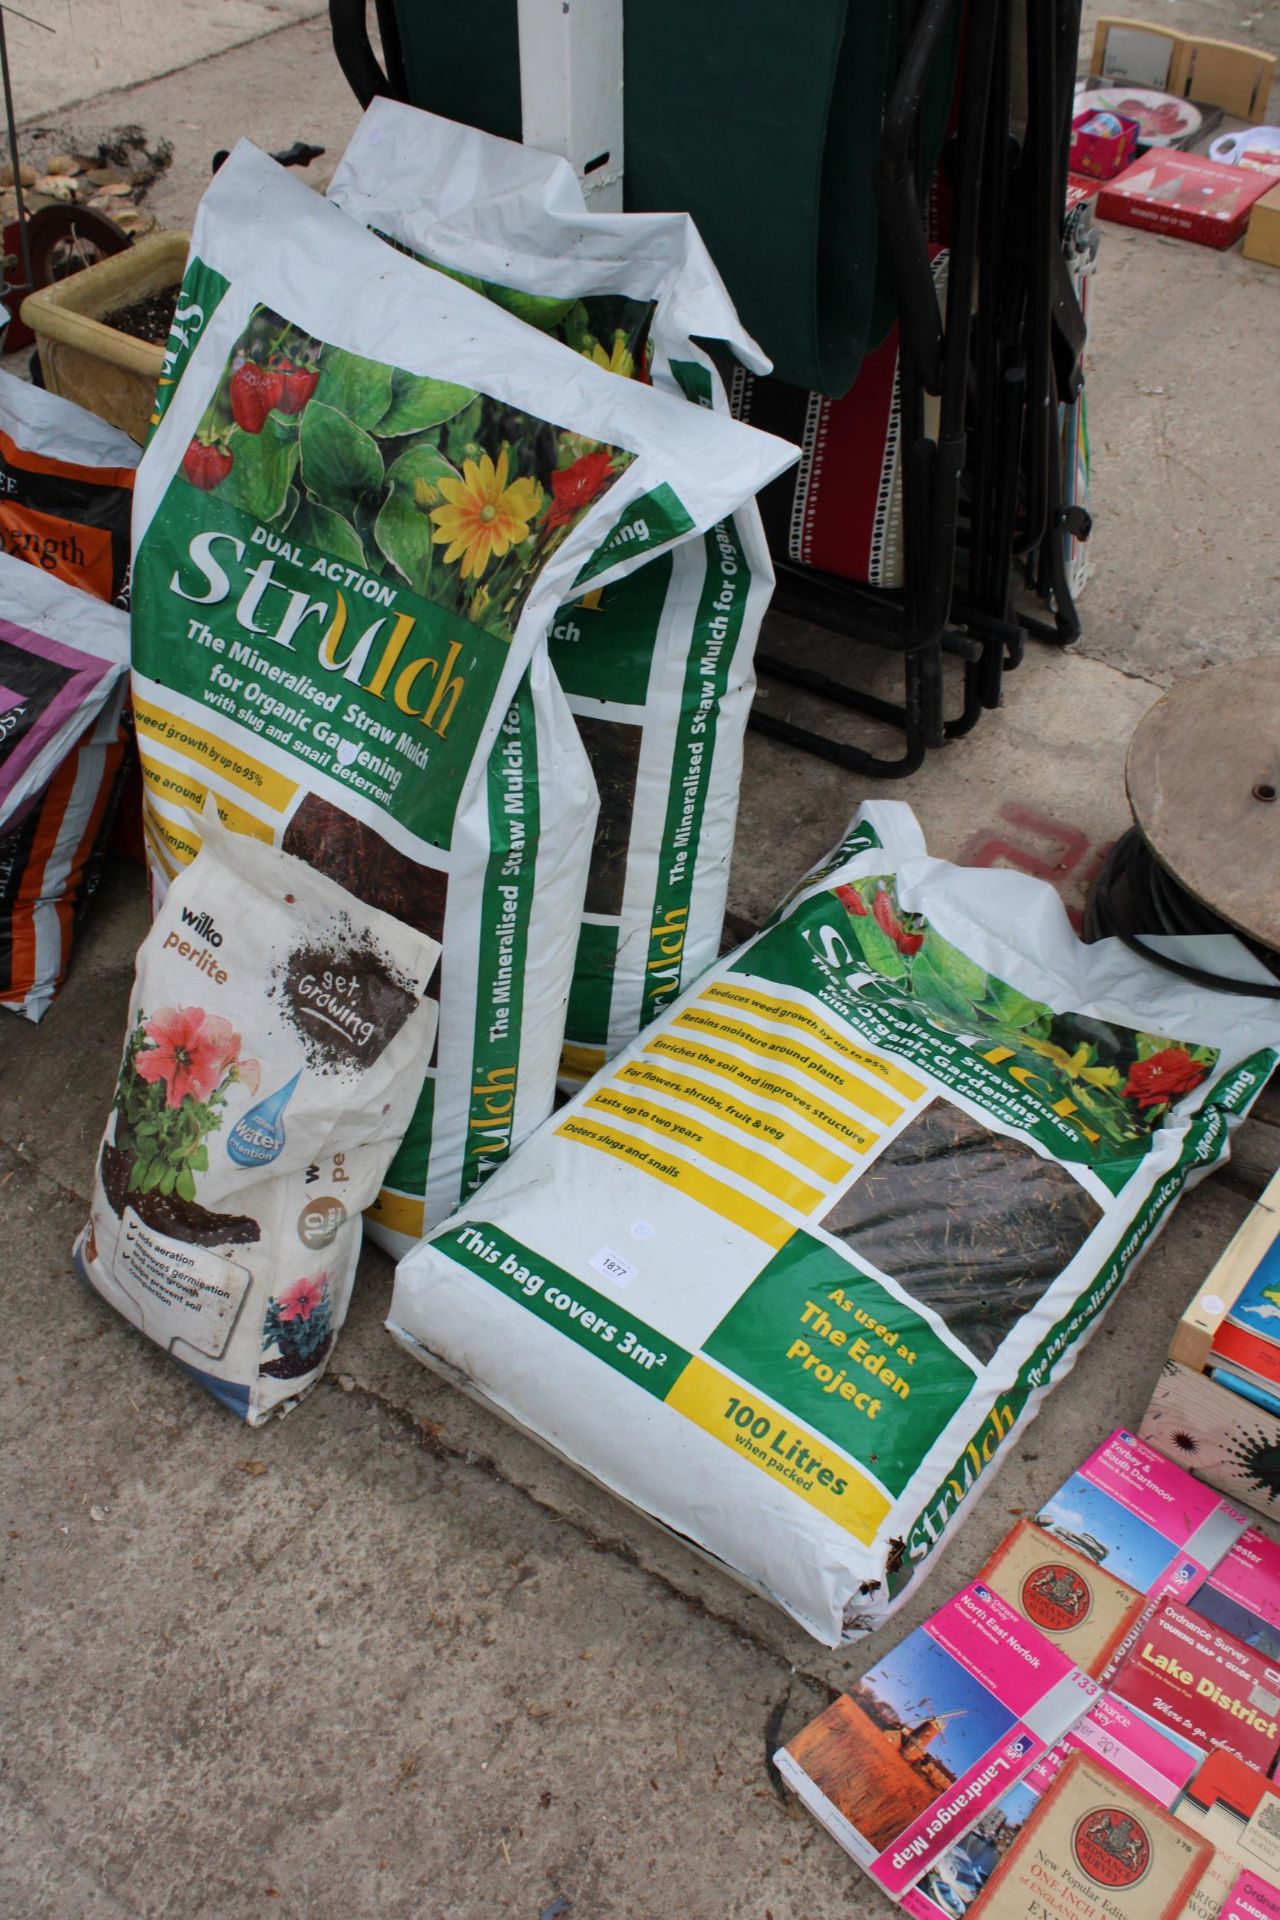 THREE BAGS OF STRULCH STRAW MULCH AND A BAG OF WATER RETENTION GRANUALES